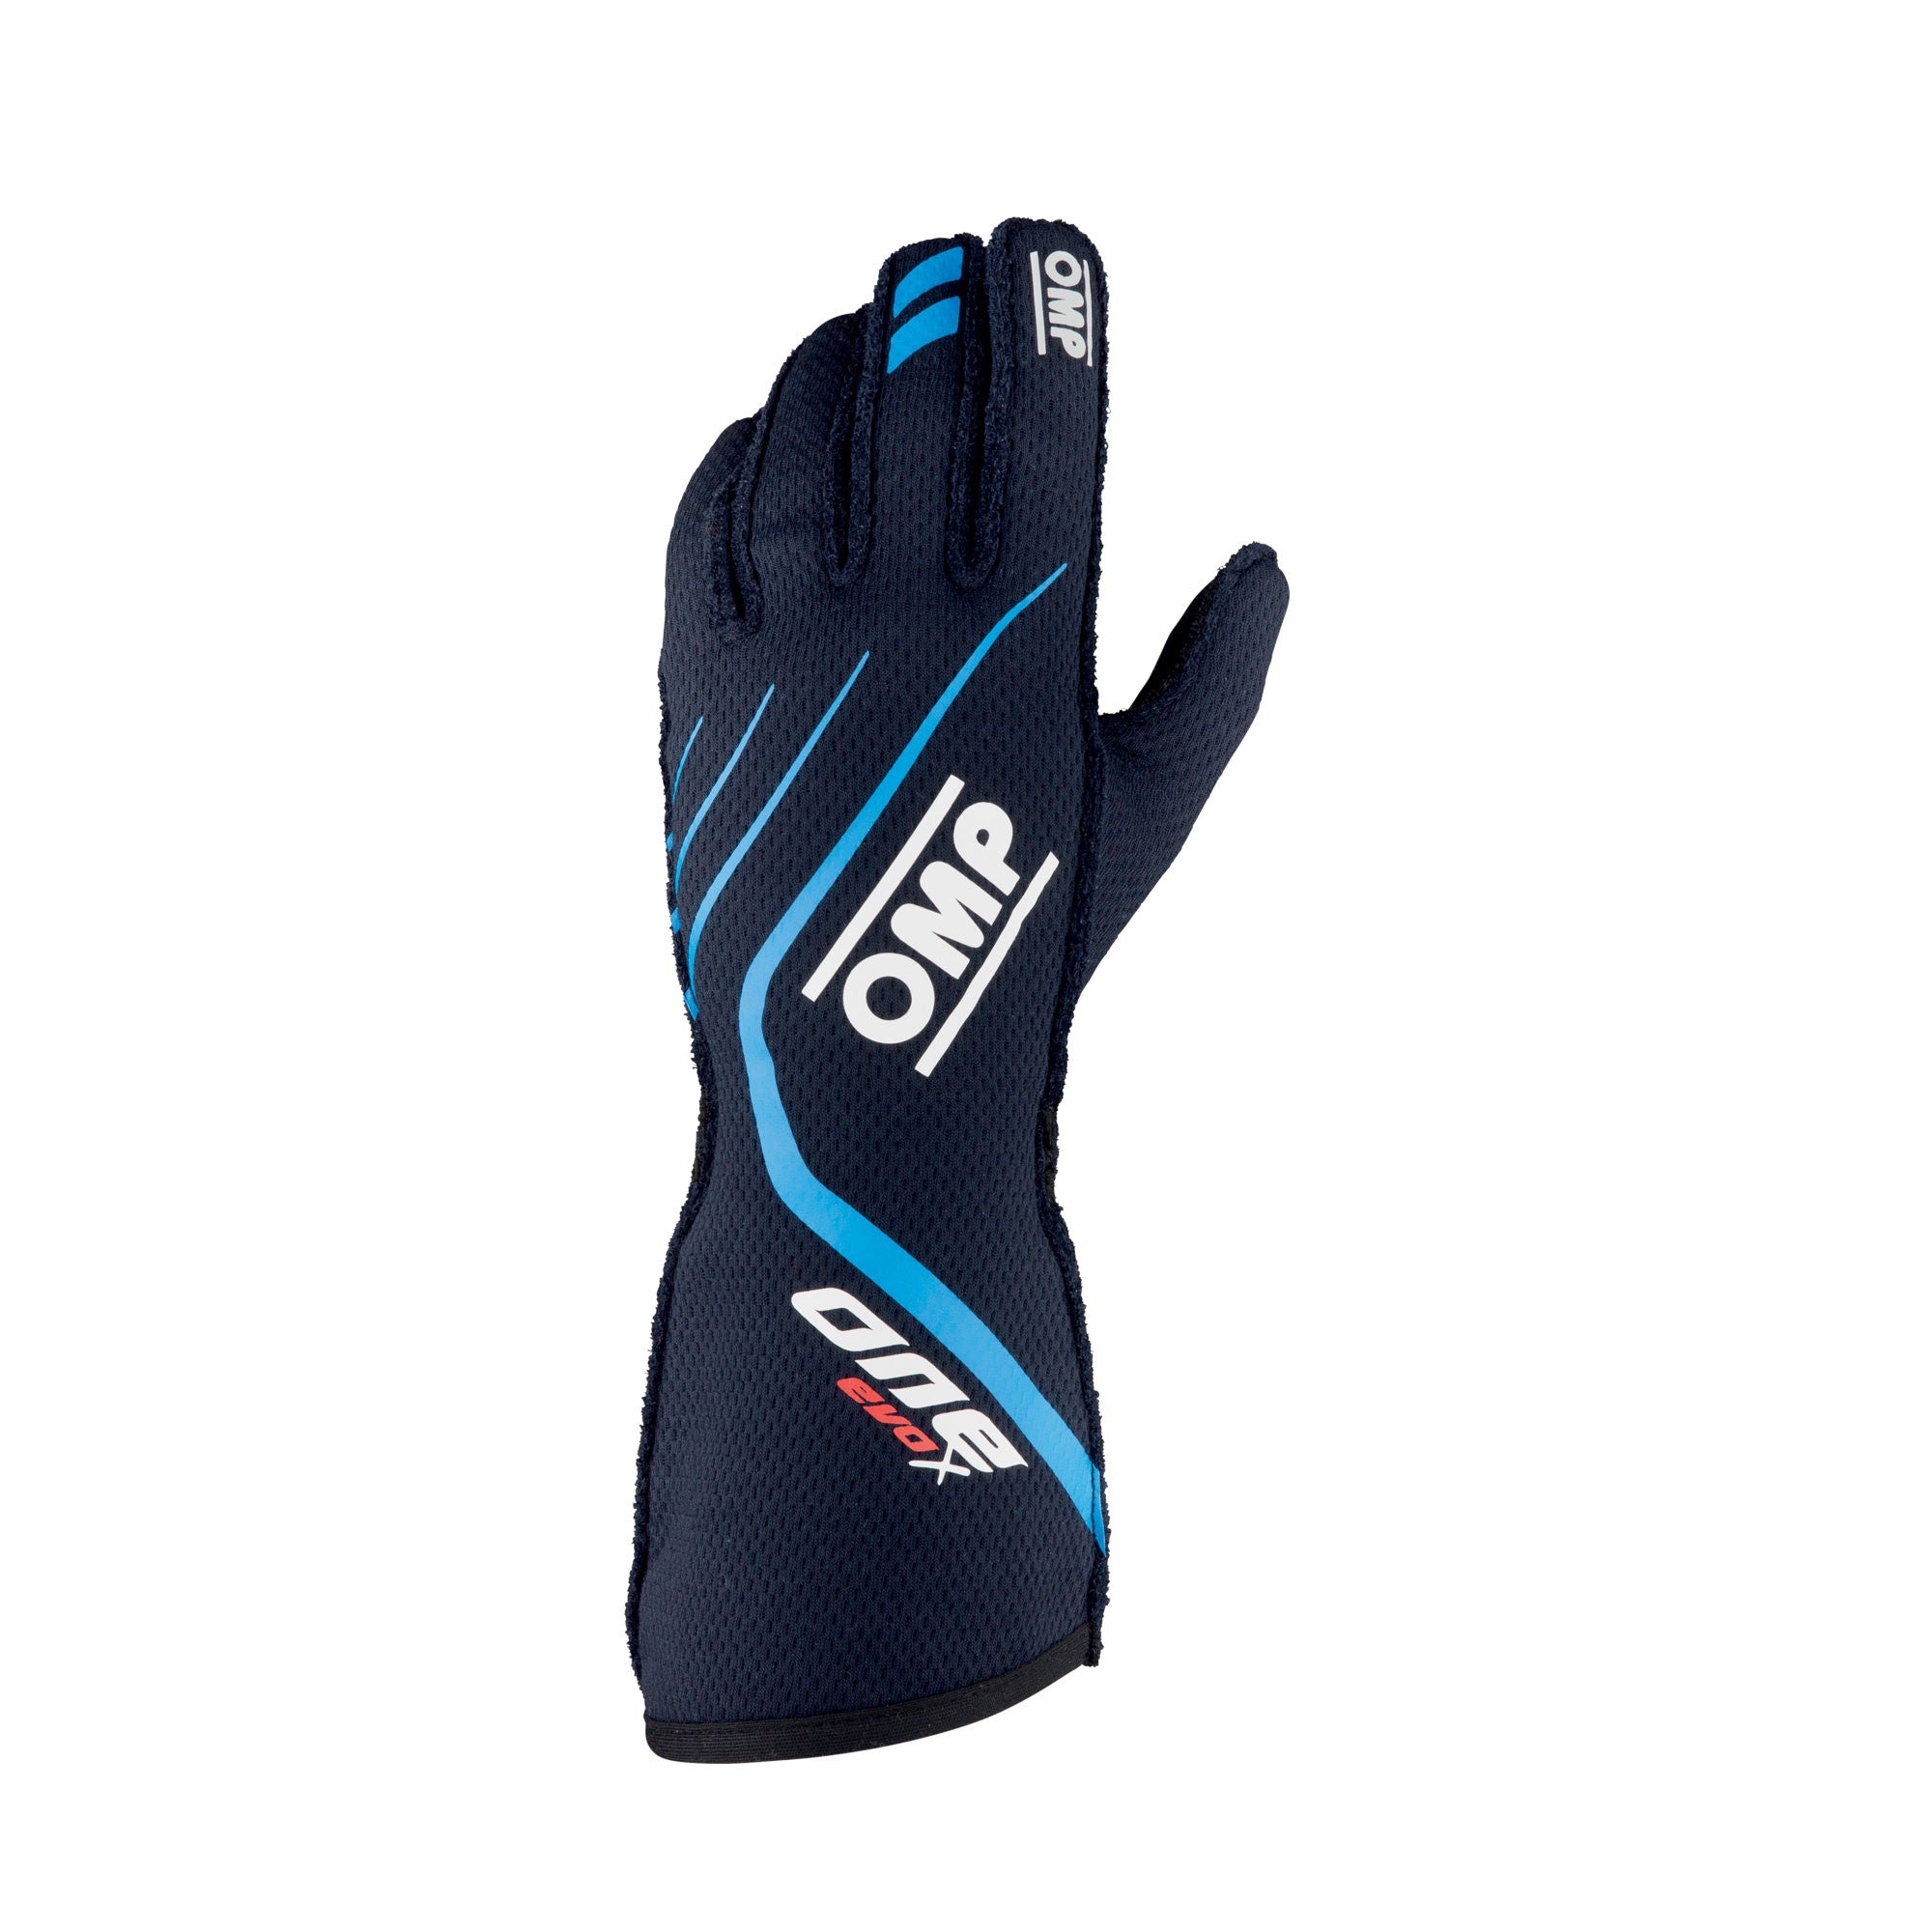 OMP One Evo X Gloves, Color: 5 options (Size: XS-XL)